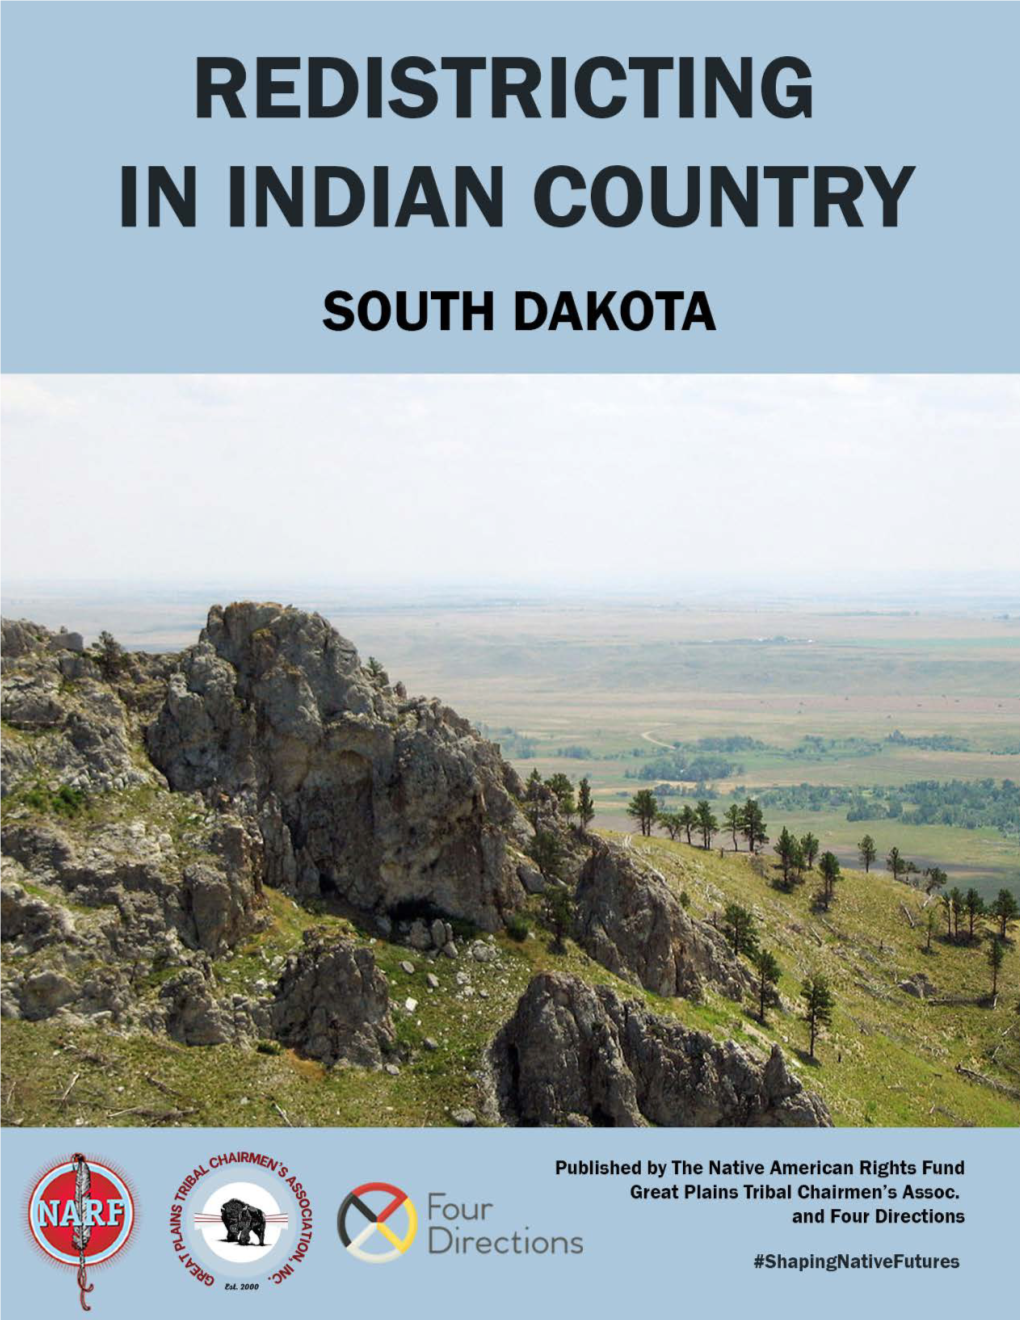 Redistricting in Indian Country in South Dakota